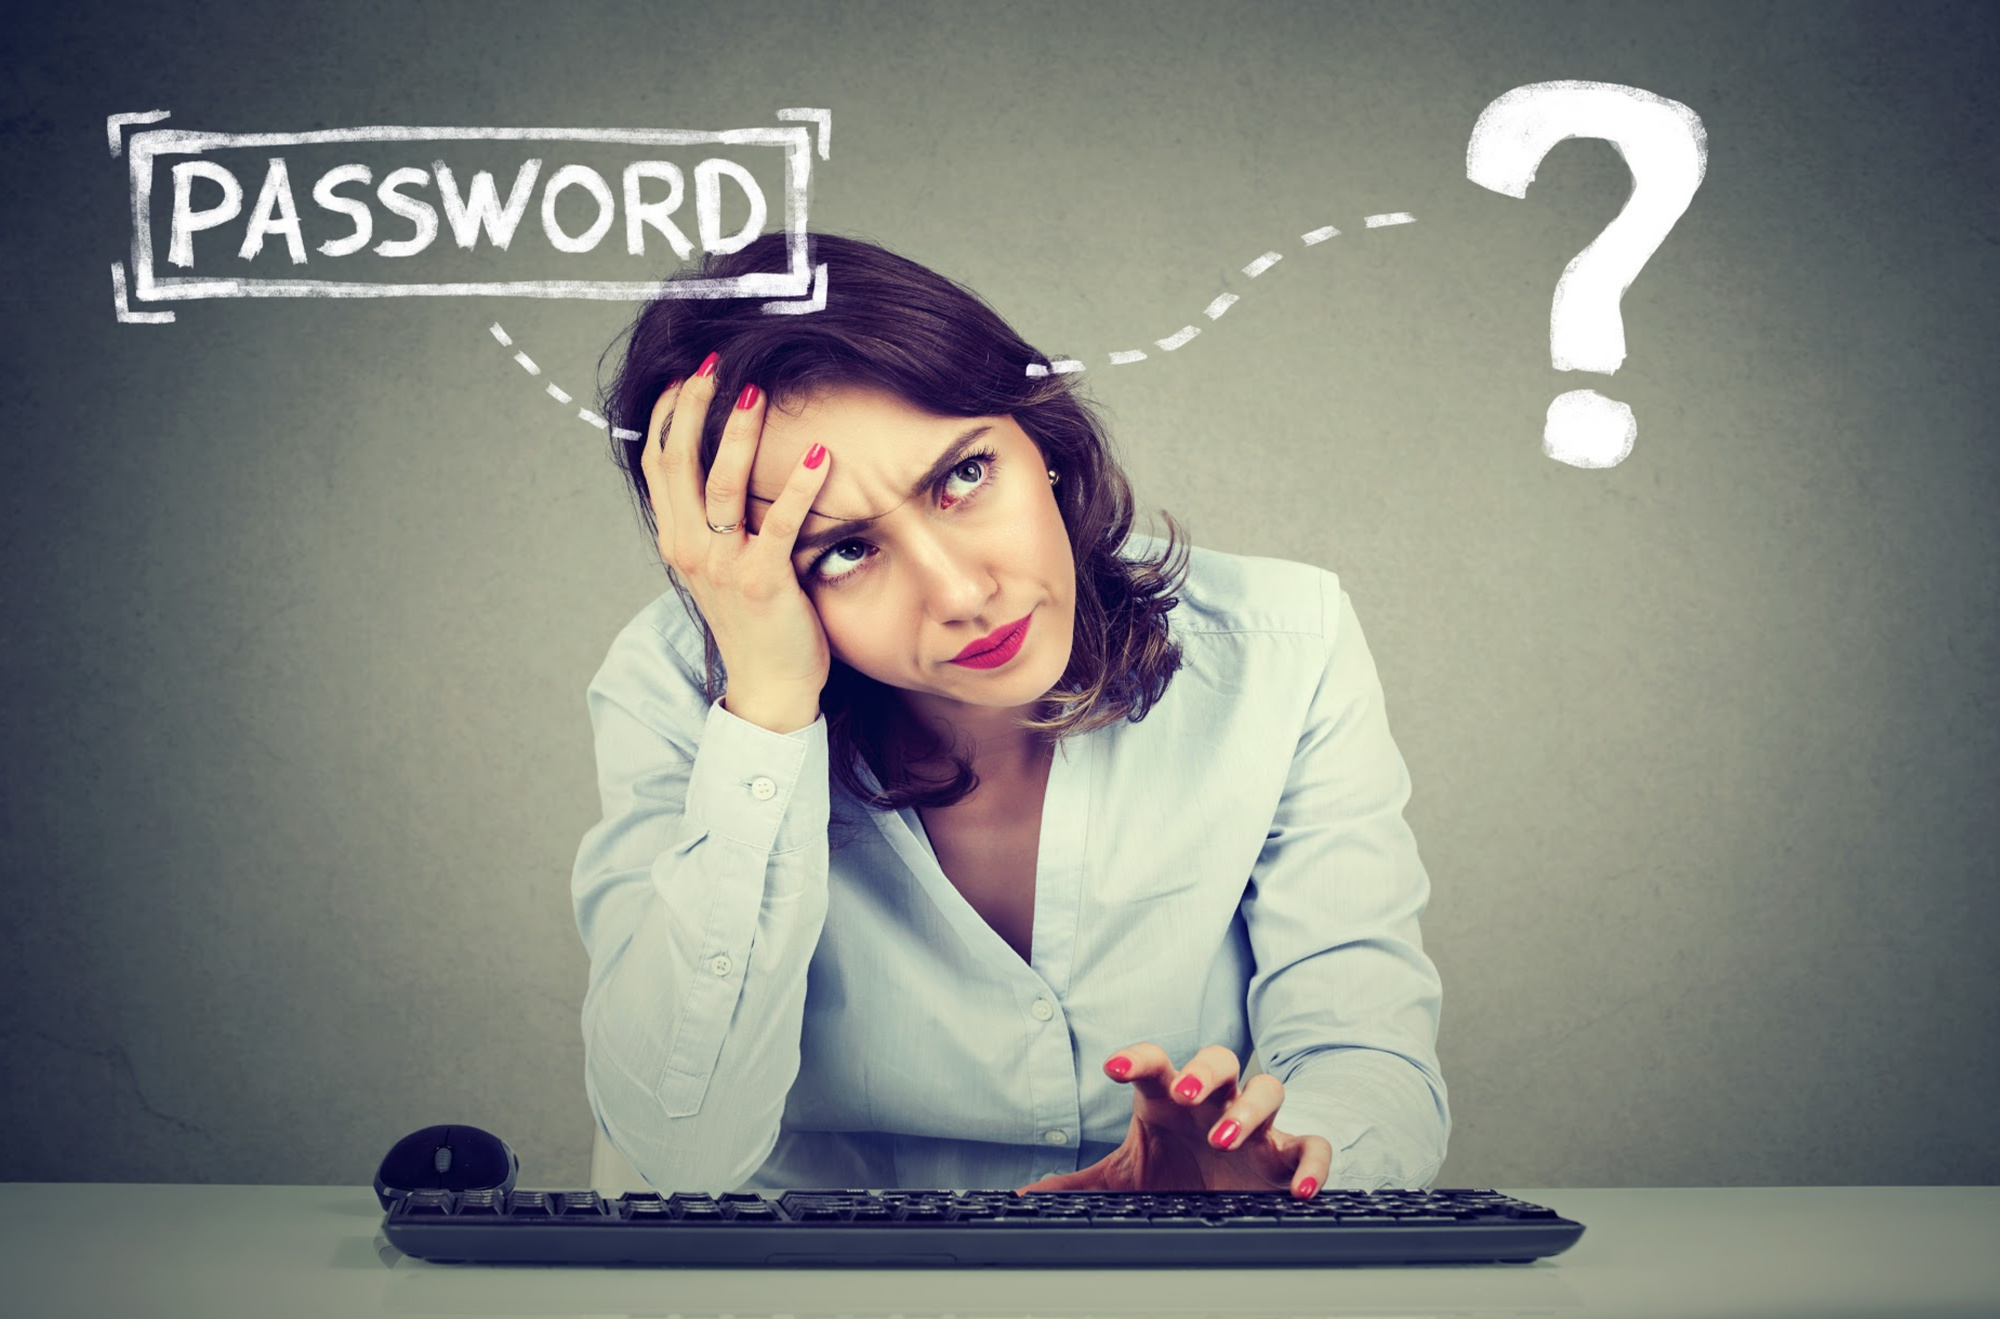 SO what are the DO'S & DON'T of a strong password?